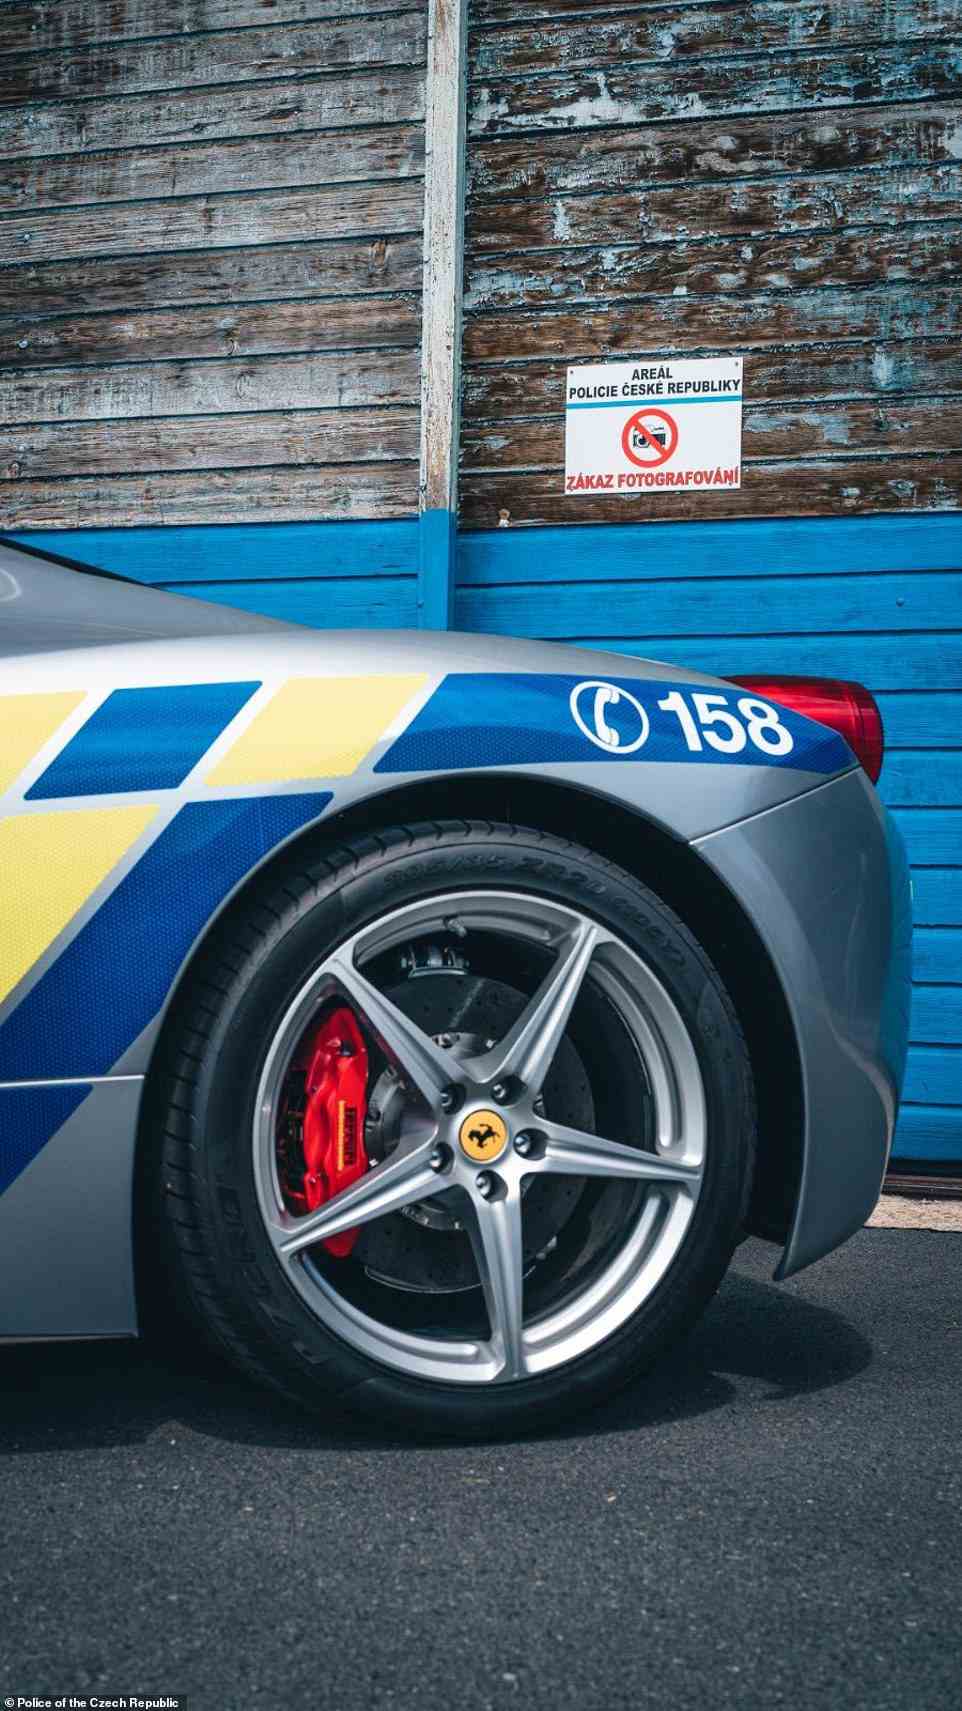 Originally painted traditional Ferrari red, the car had a complete police makeover, receiving a silver spray job before adding yellow and blue reflective stripes for the fully-authentic look